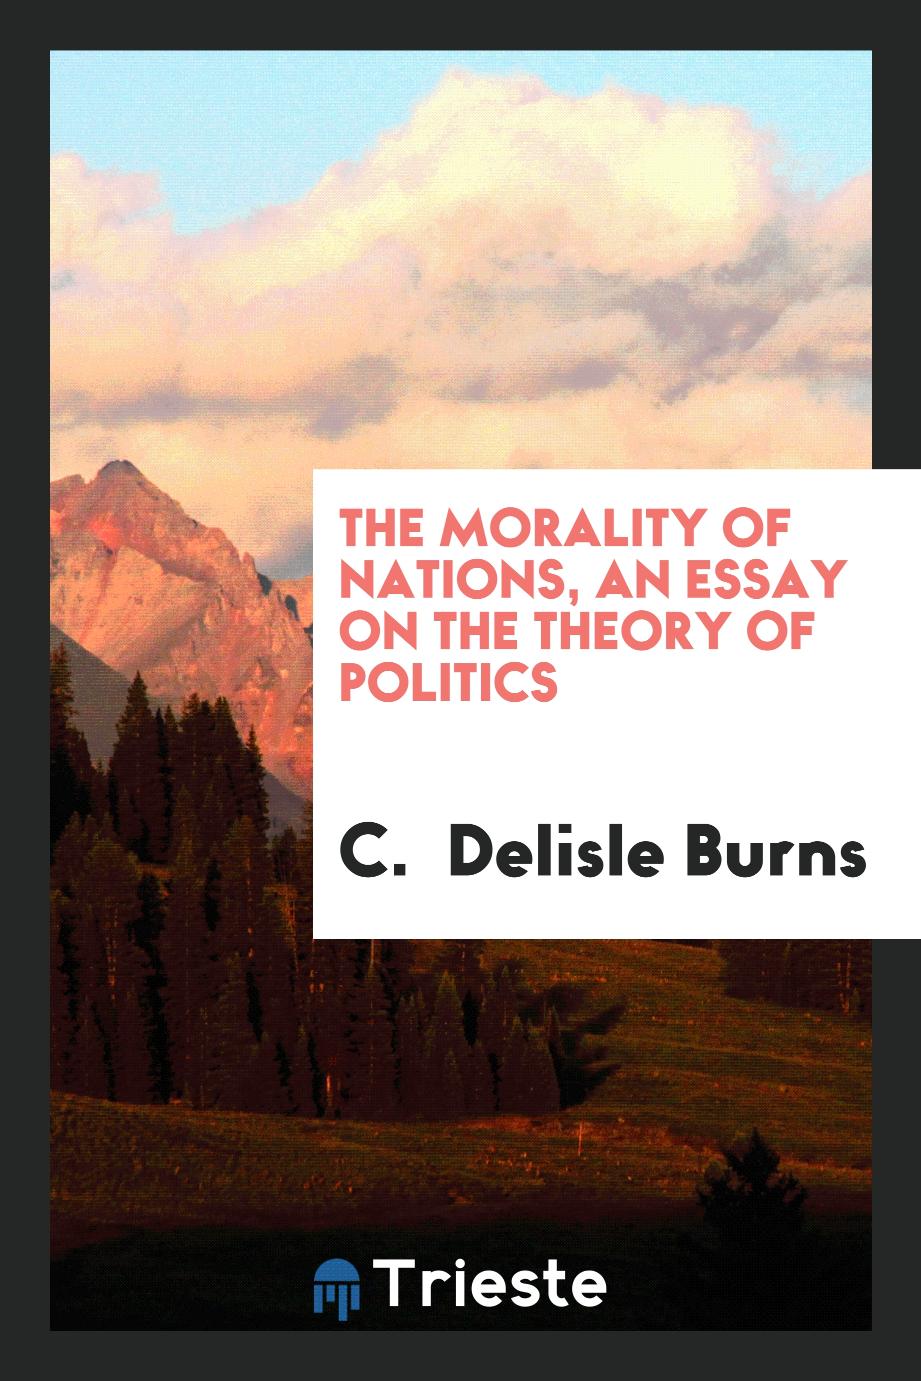 The morality of nations, an essay on the theory of politics